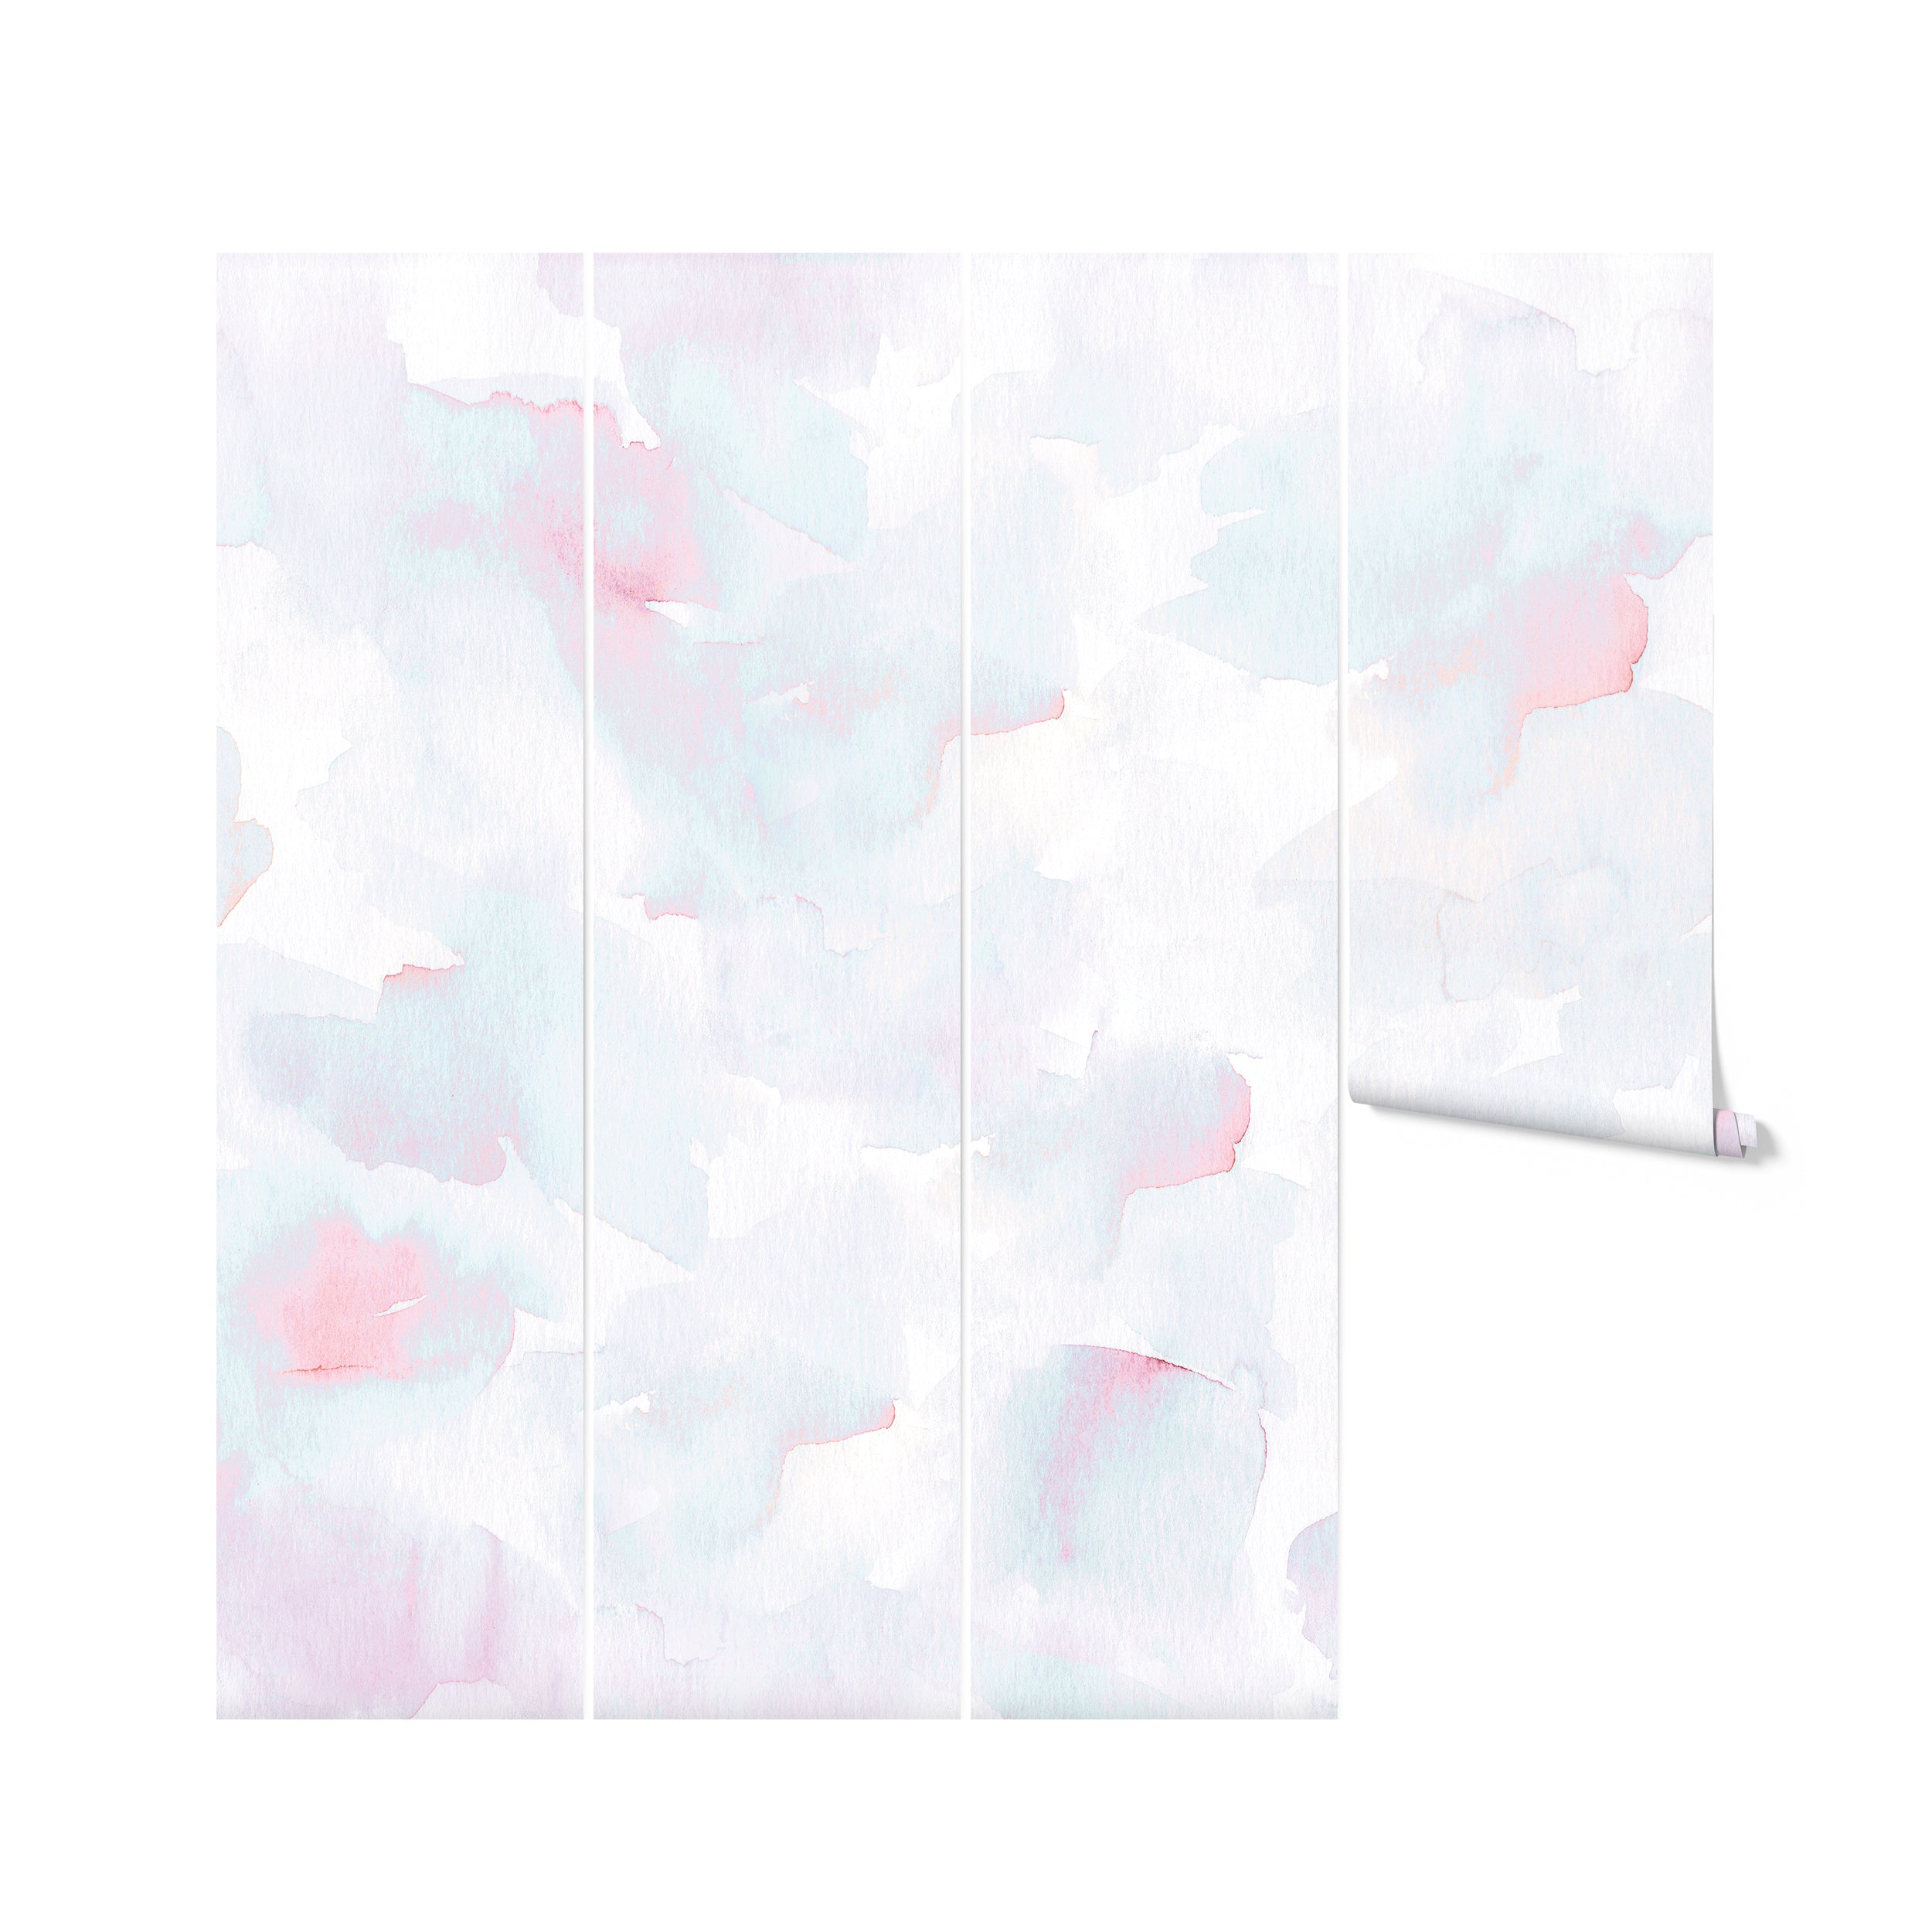 Three panels of the Hand Painted Mural - Cotton Candy wallpaper, showcasing a flowing blend of watercolor washes in delicate pink and blue tones on a white background. This mural adds a soft, artistic touch to any room, perfect for creating a tranquil and inviting atmosphere.